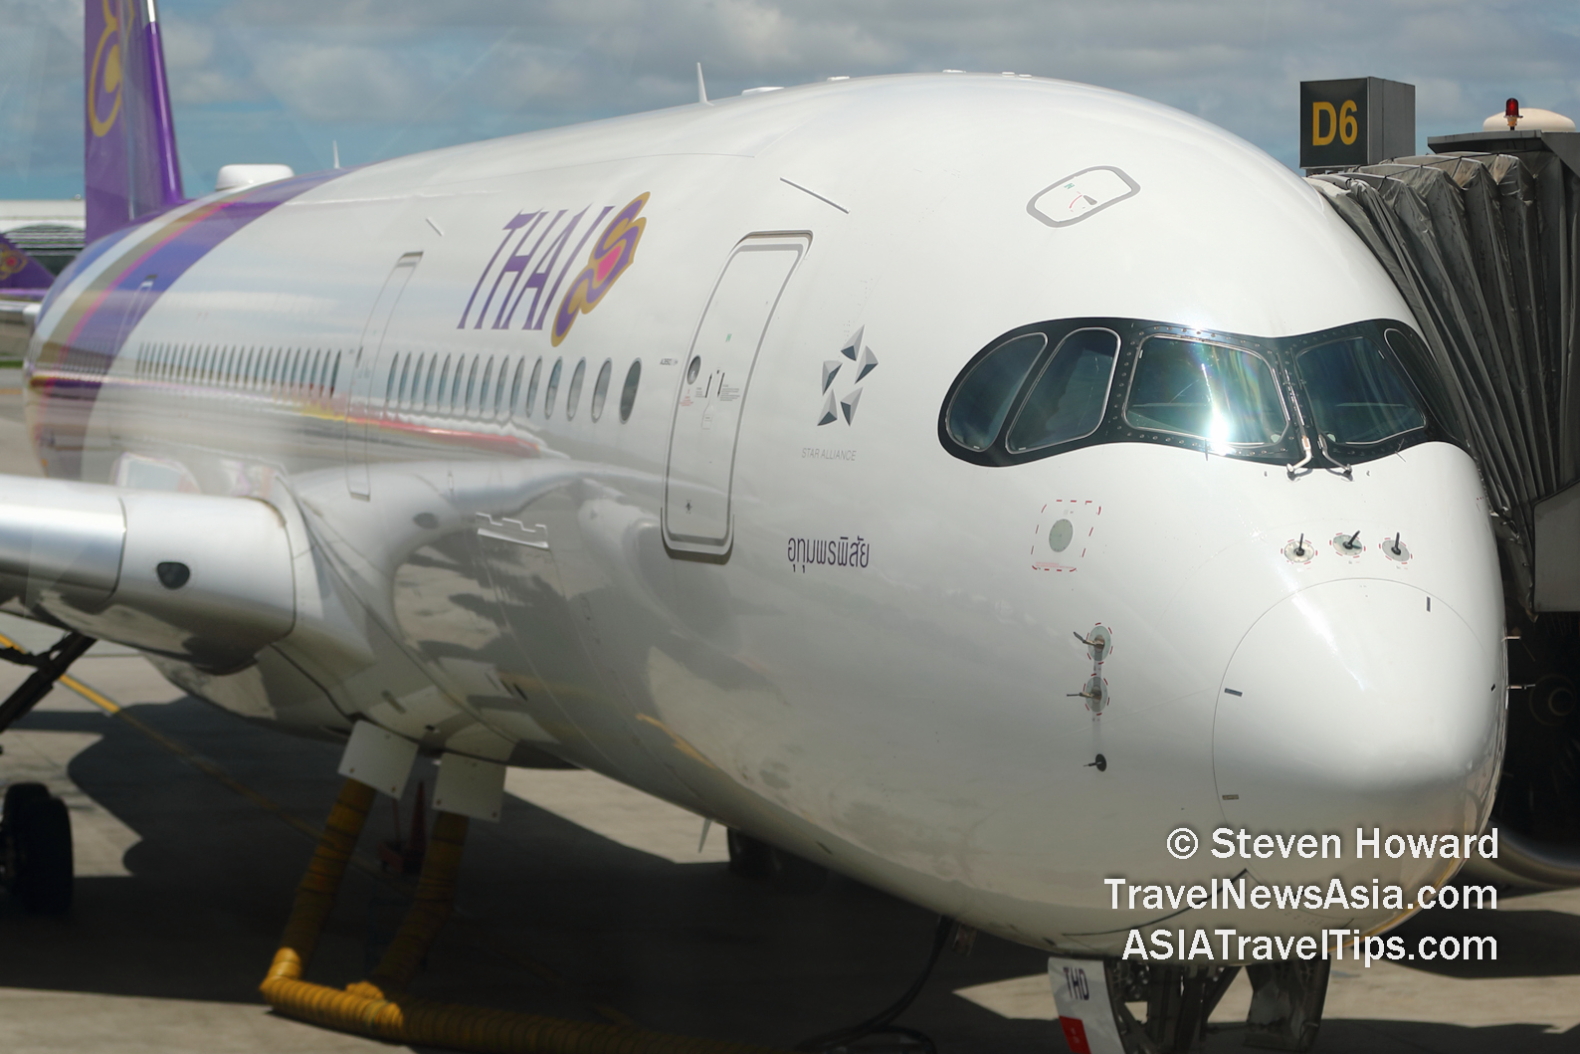 Thai Airways A350. Picture by Steven Howard of TravelNewsAsia.com Click to enlarge.